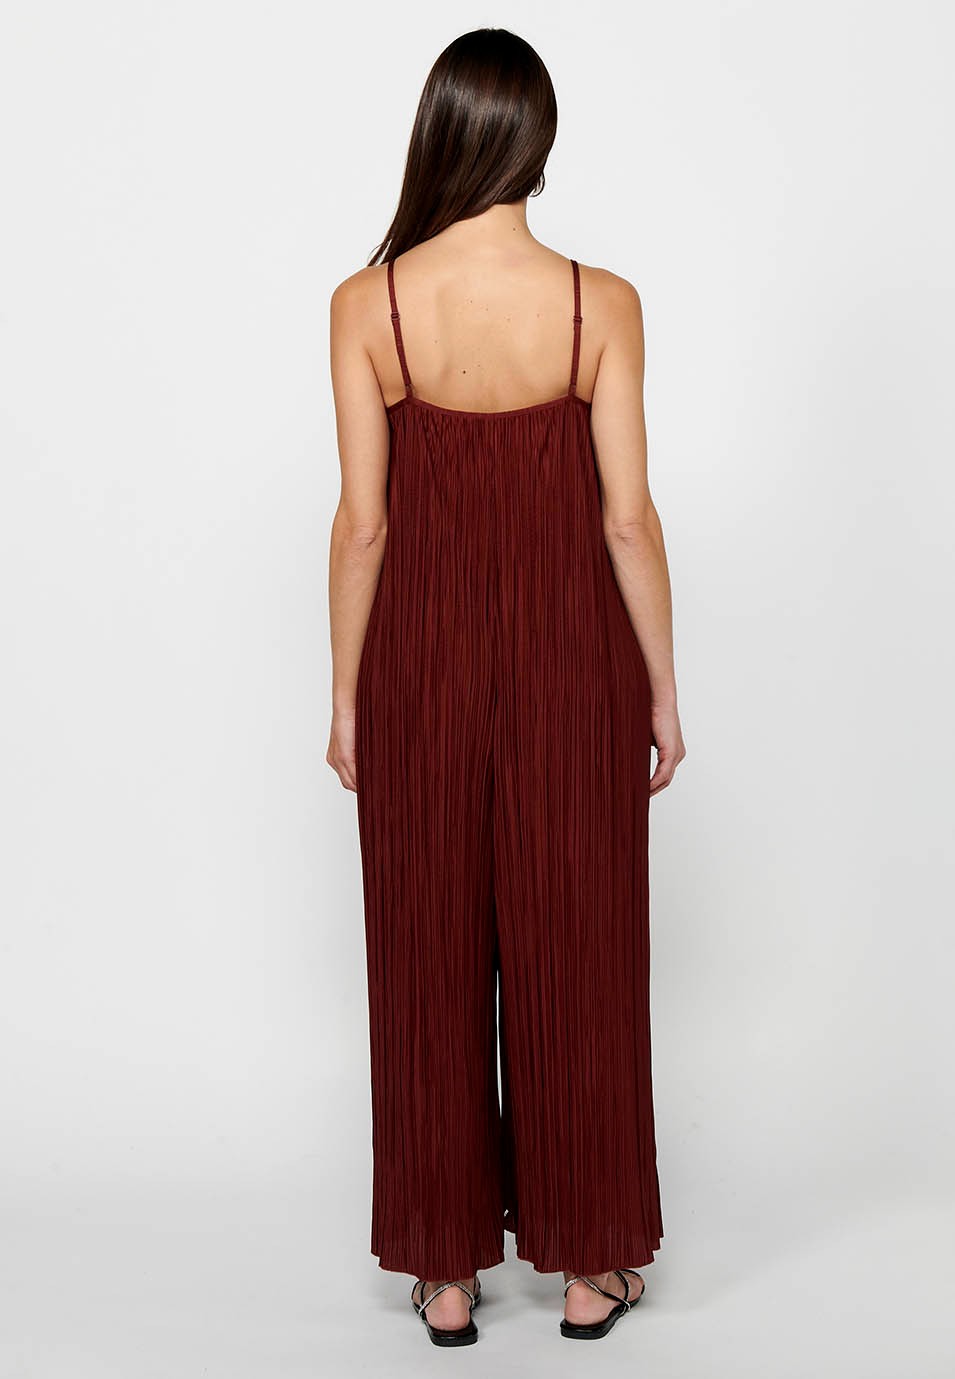 Women's Loose Fabric Jumpsuit Dress with Folds and Adjustable Maroon Straps